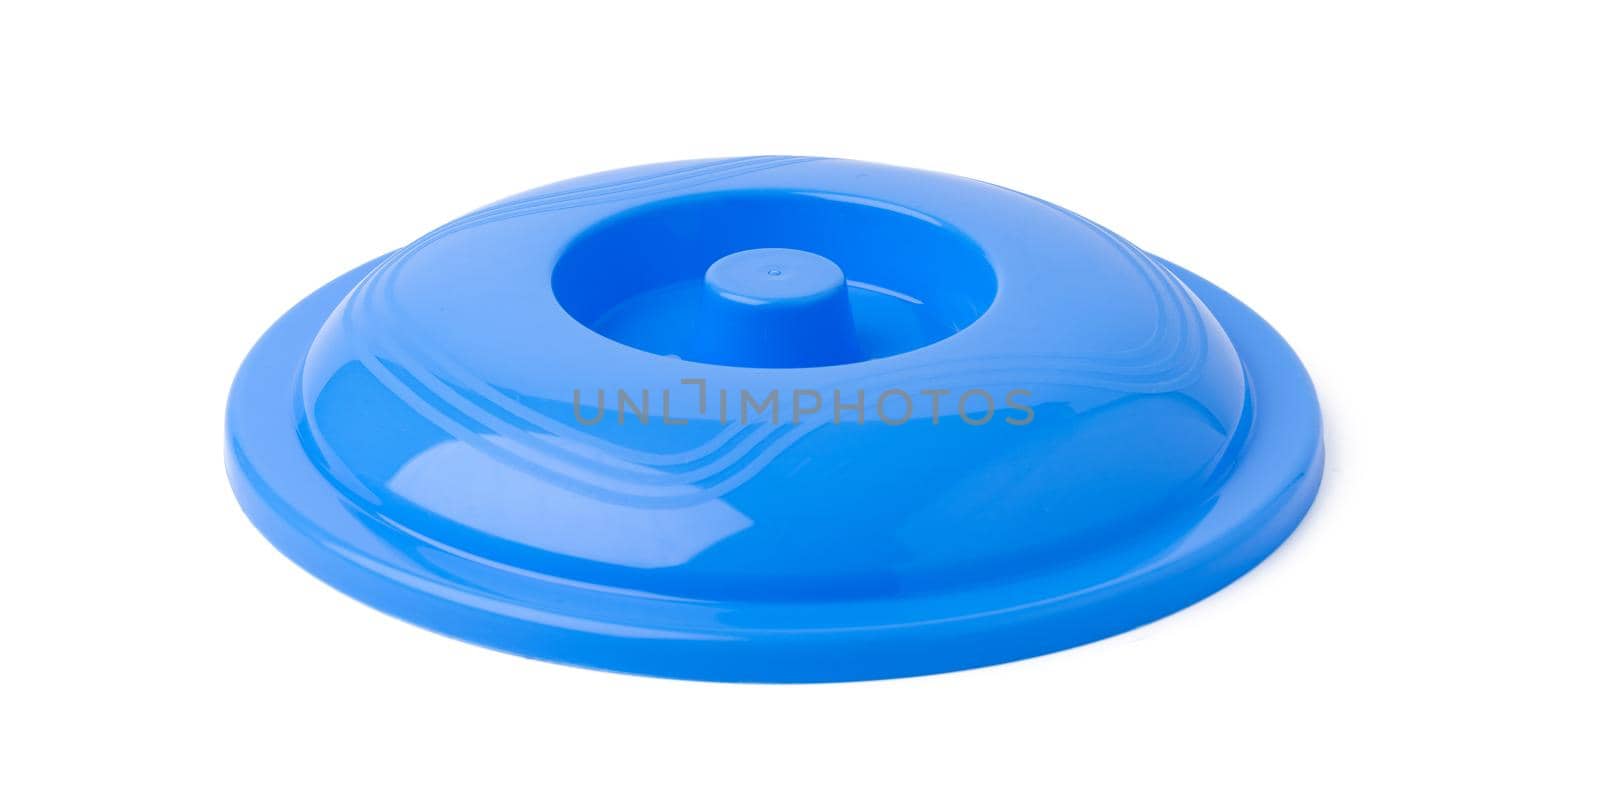 Blue plastic bucket lid isolated on white by Fabrikasimf